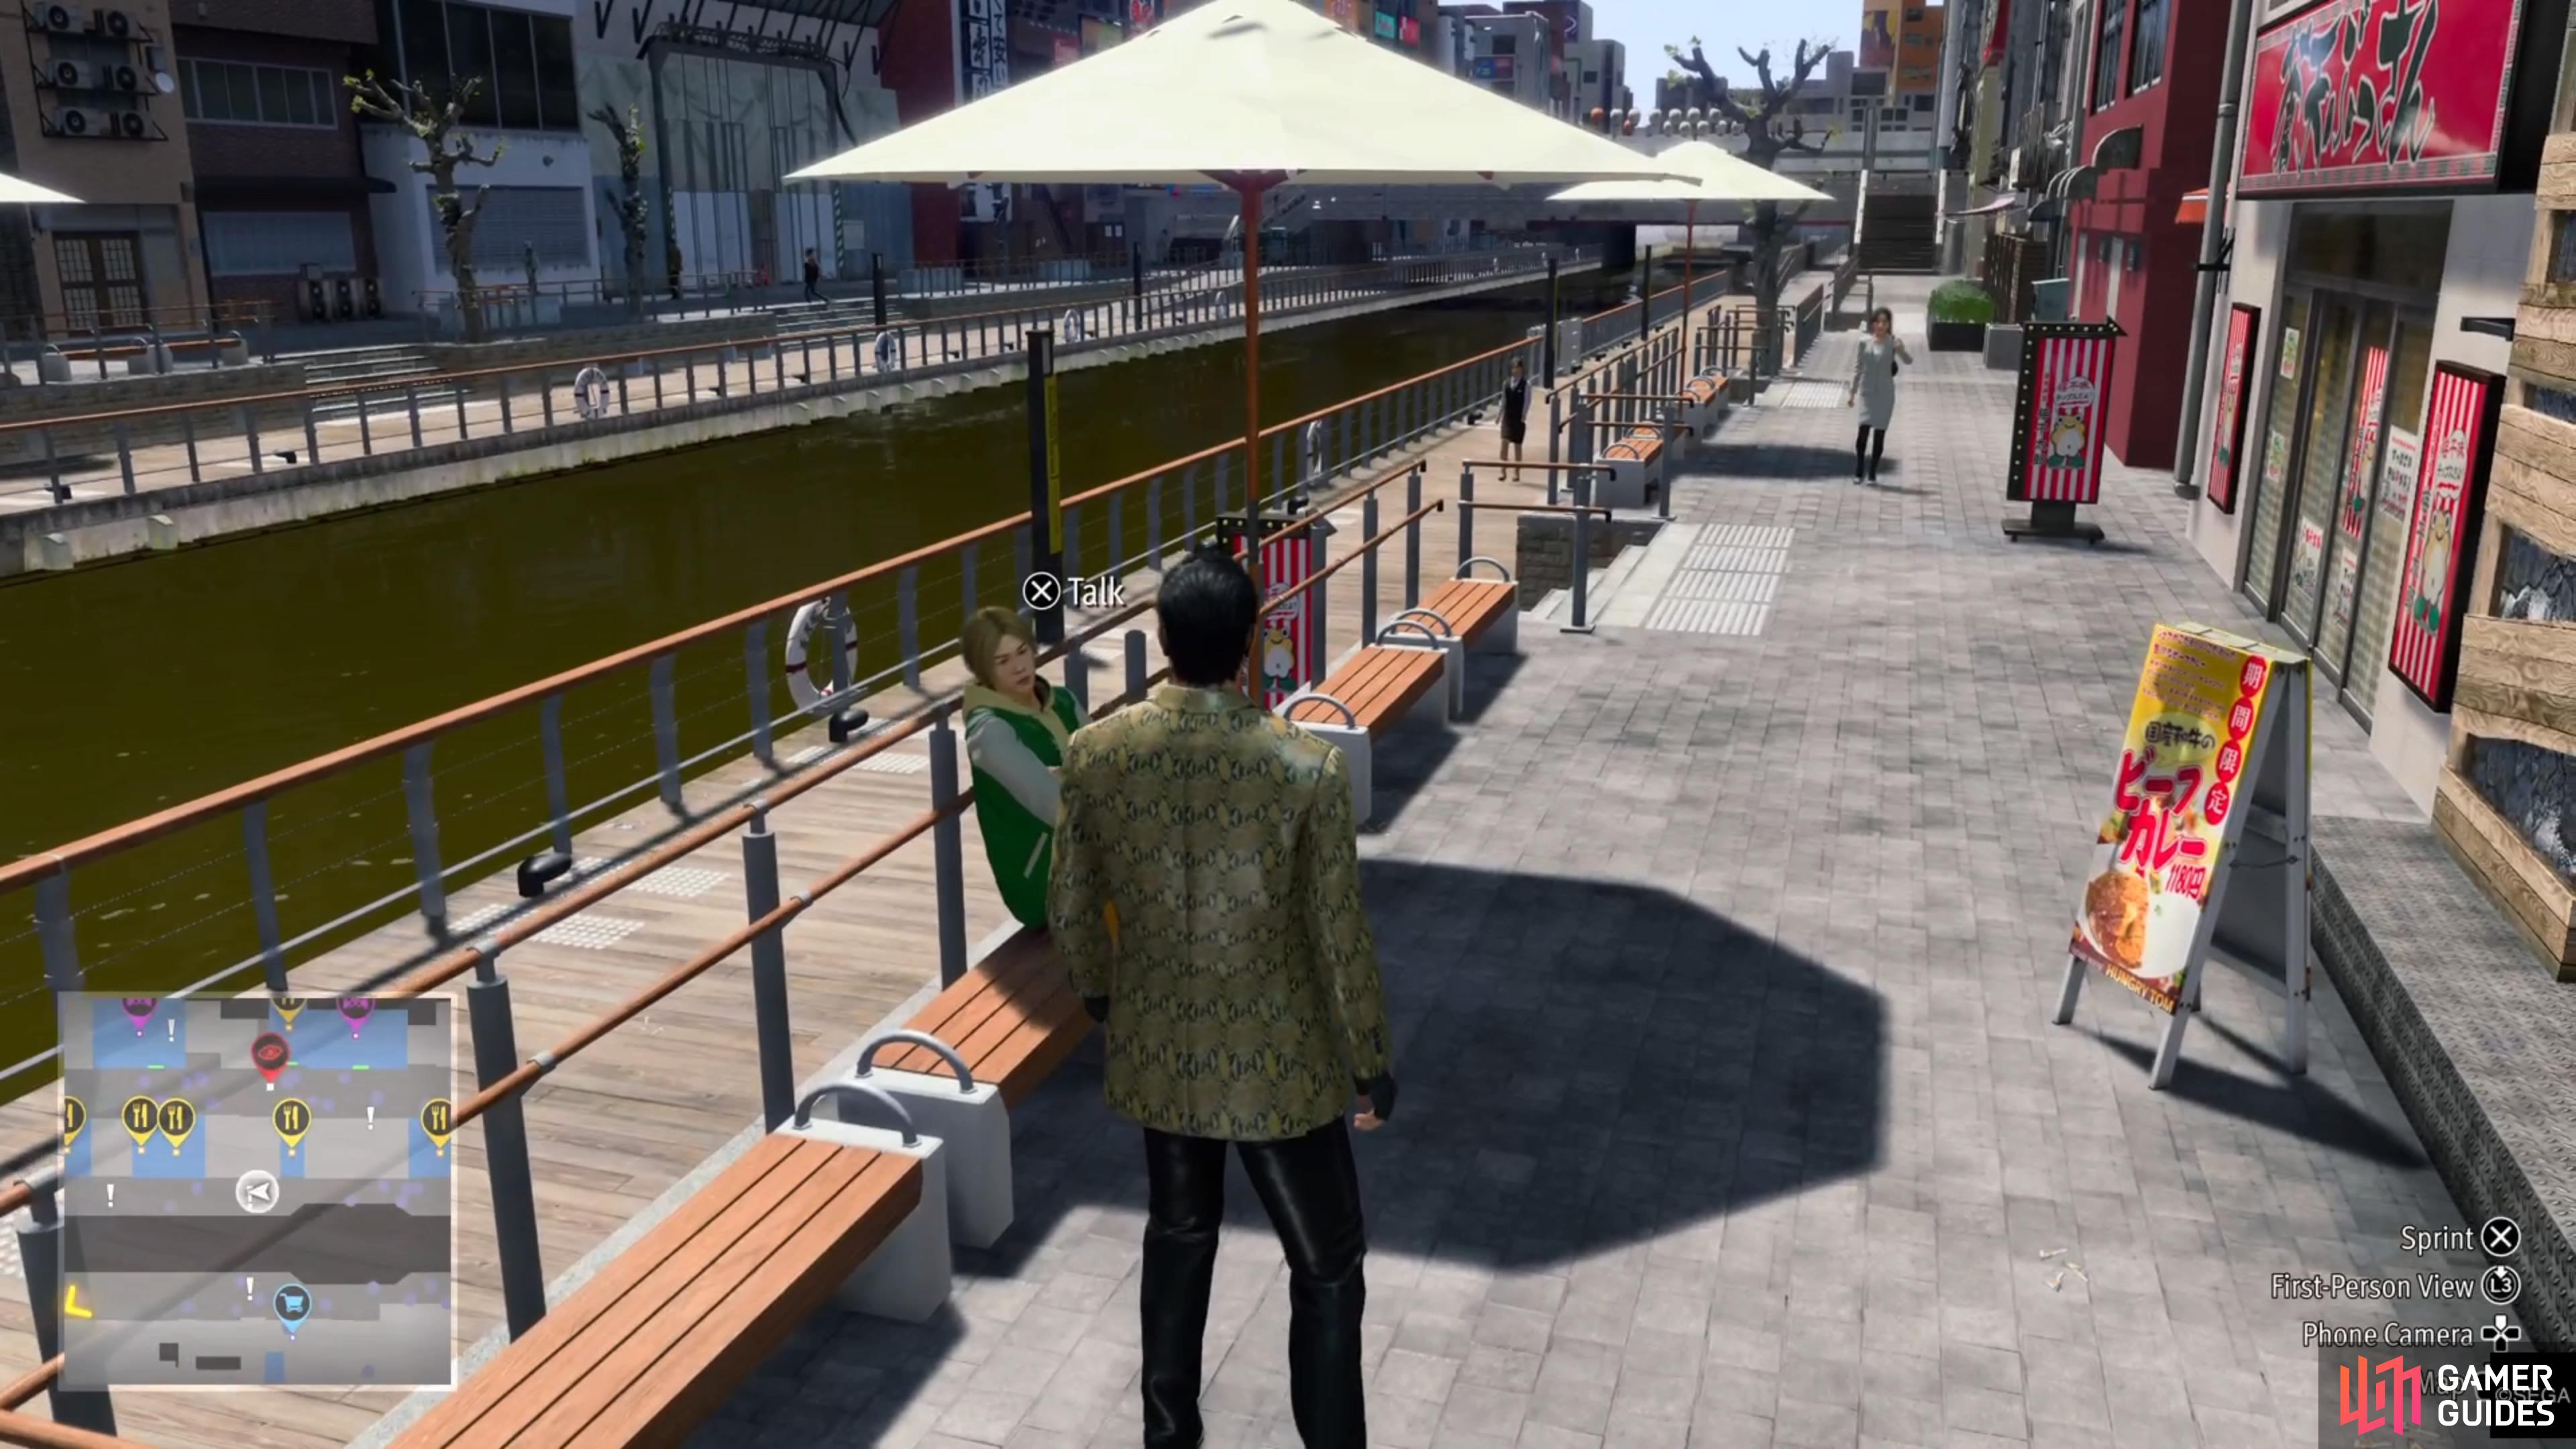 The NPC sitting on the bench will give you a Stroll n' Patrol quest.